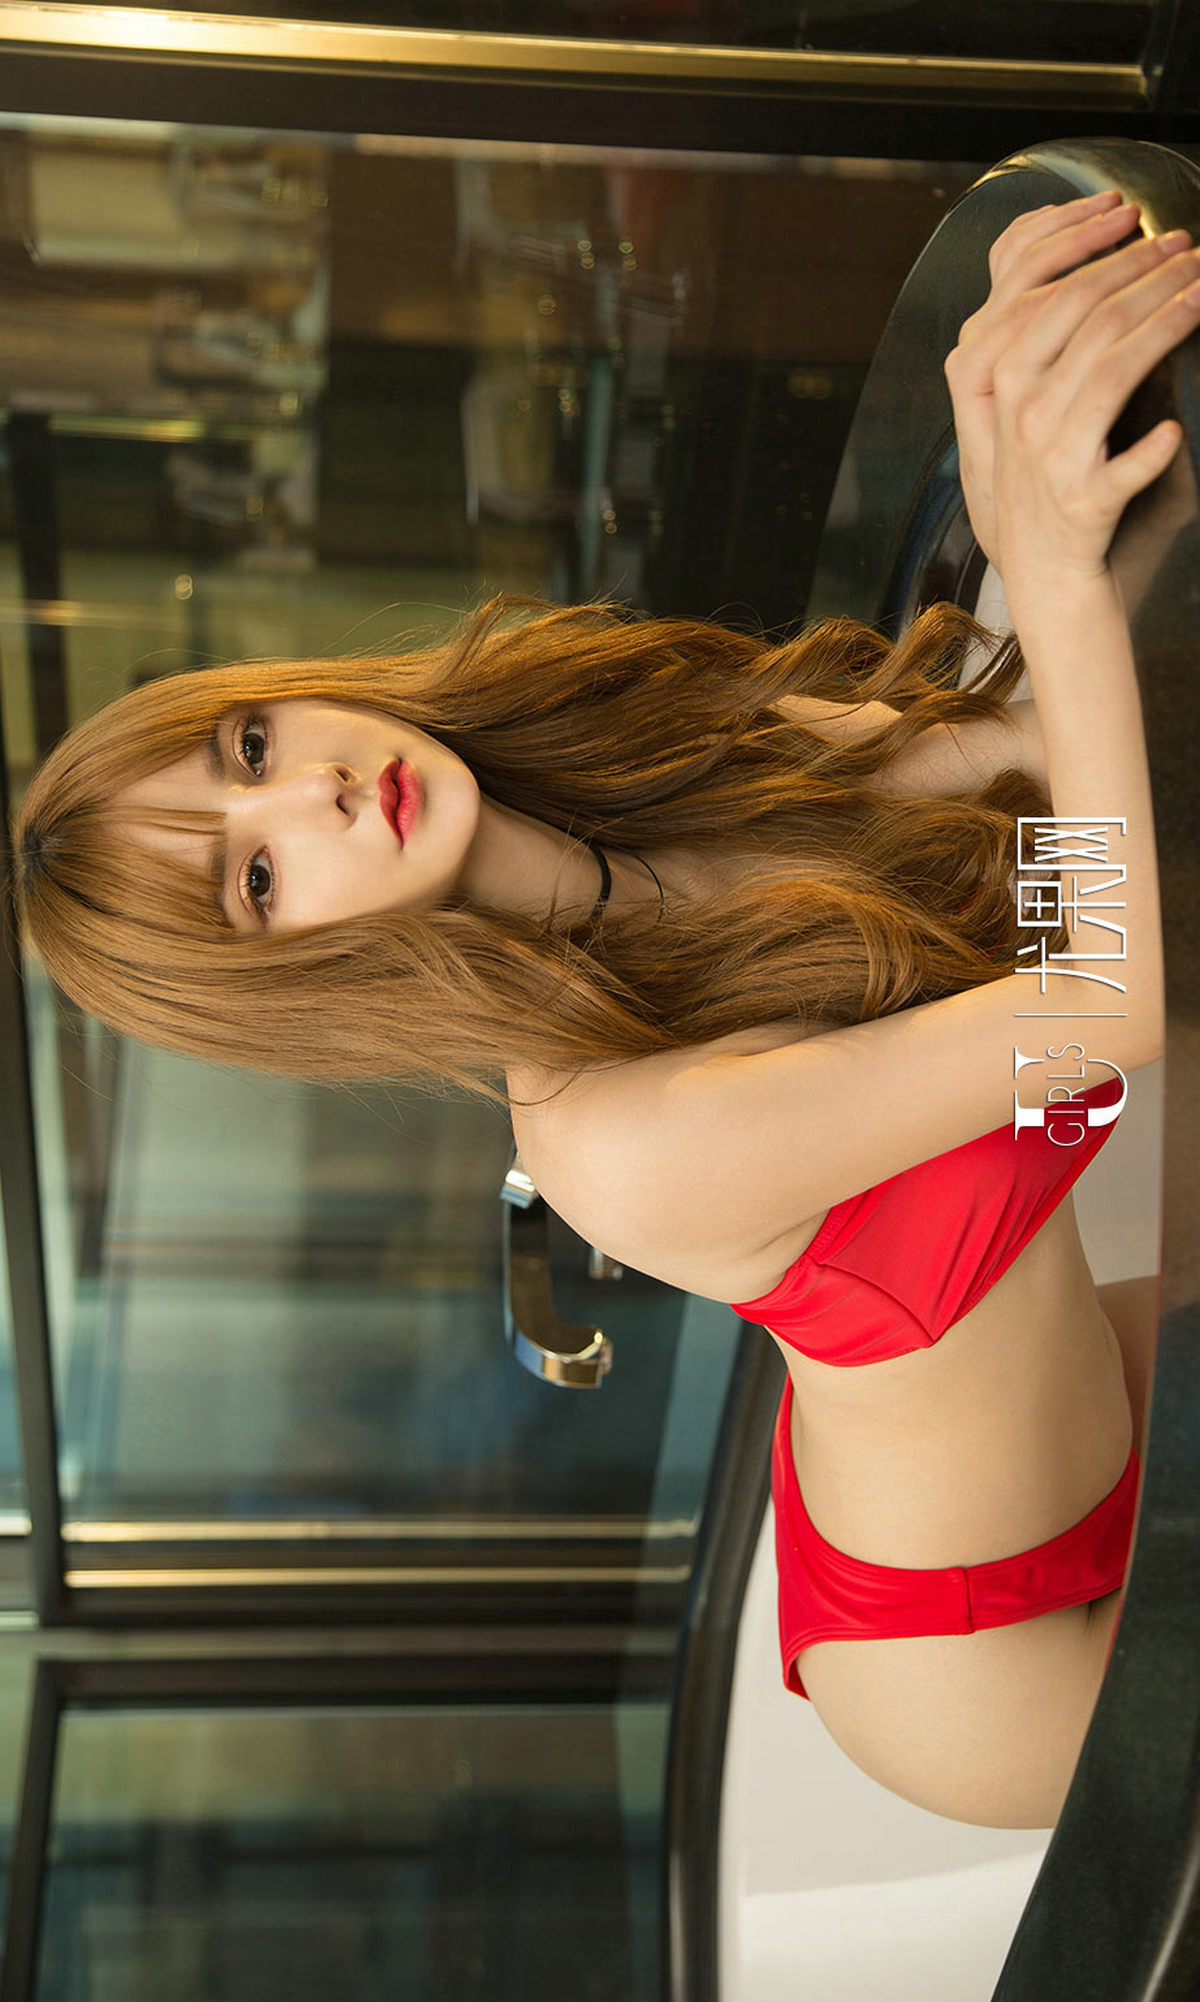 [aiyouwu] 2018app no.1217 Vicky a sultry doll